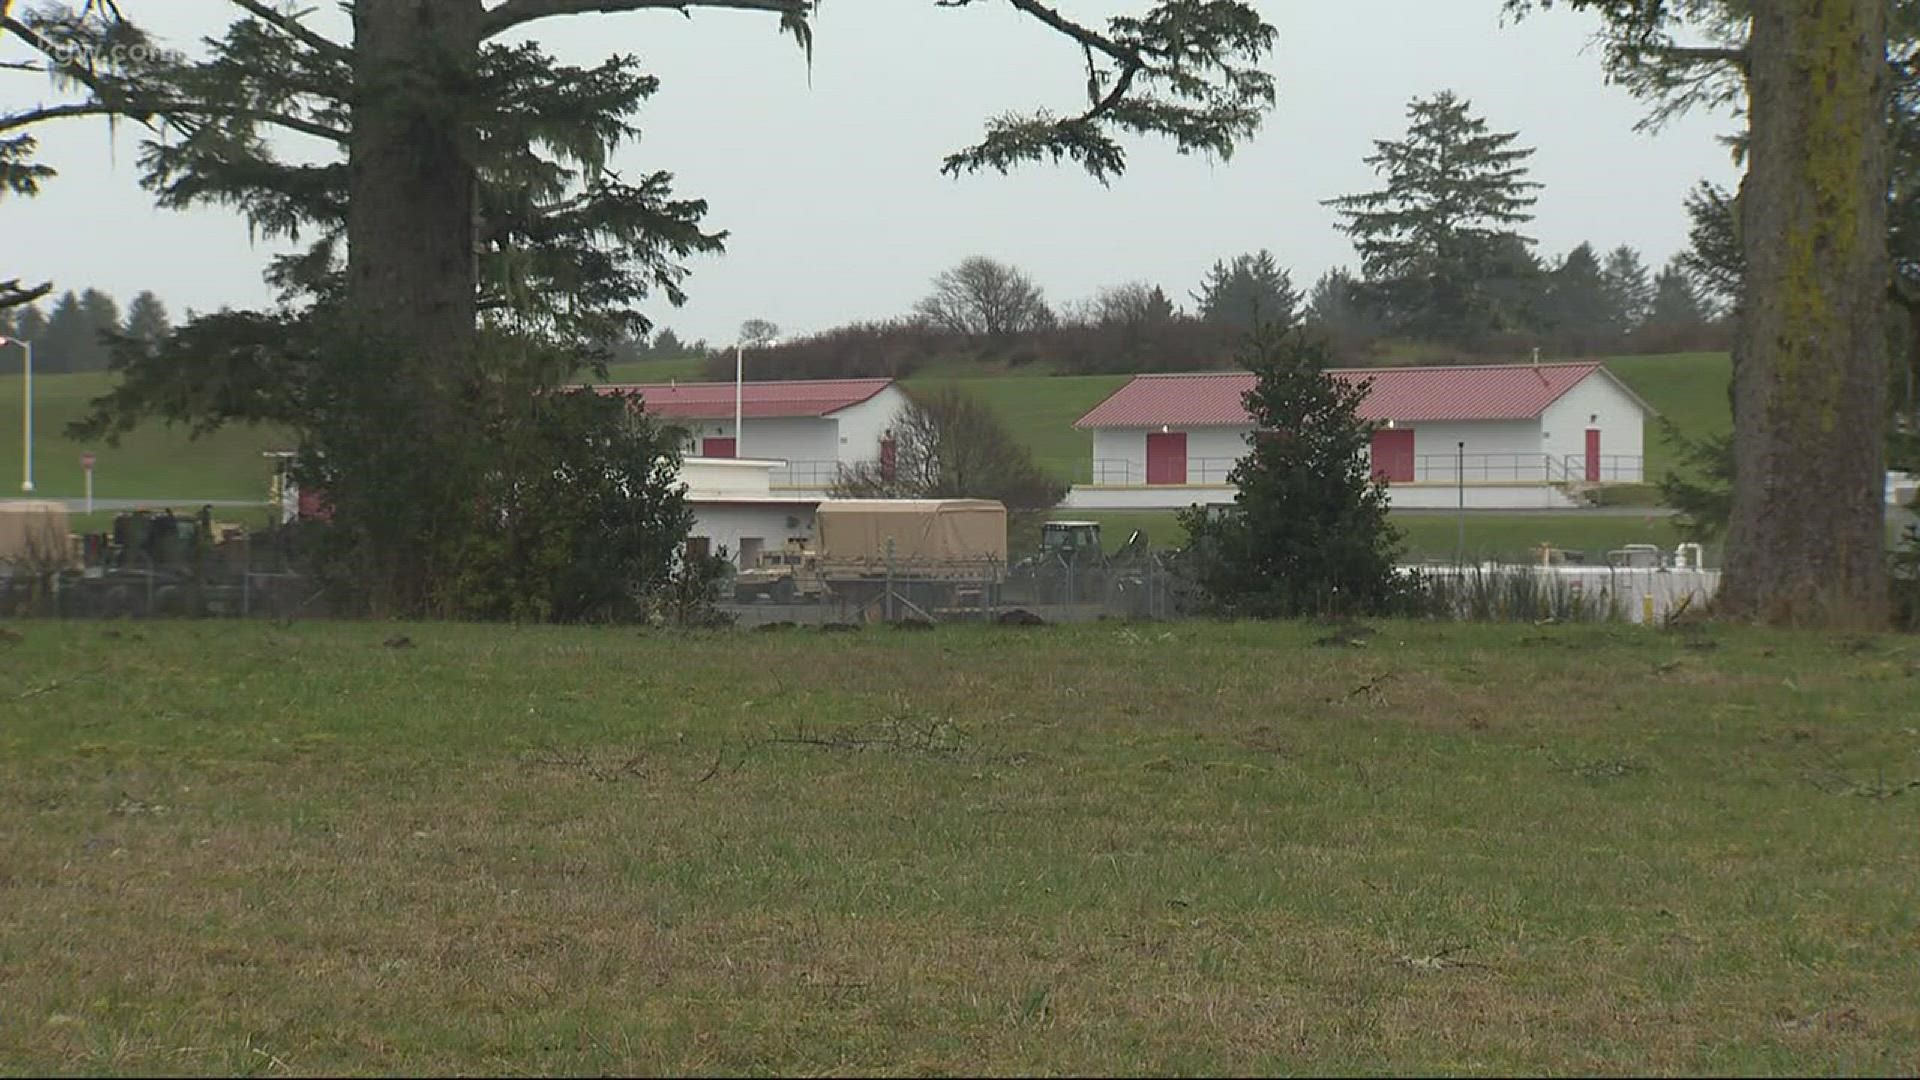 A soldier died in an accidental shooting at Camp Rilea.